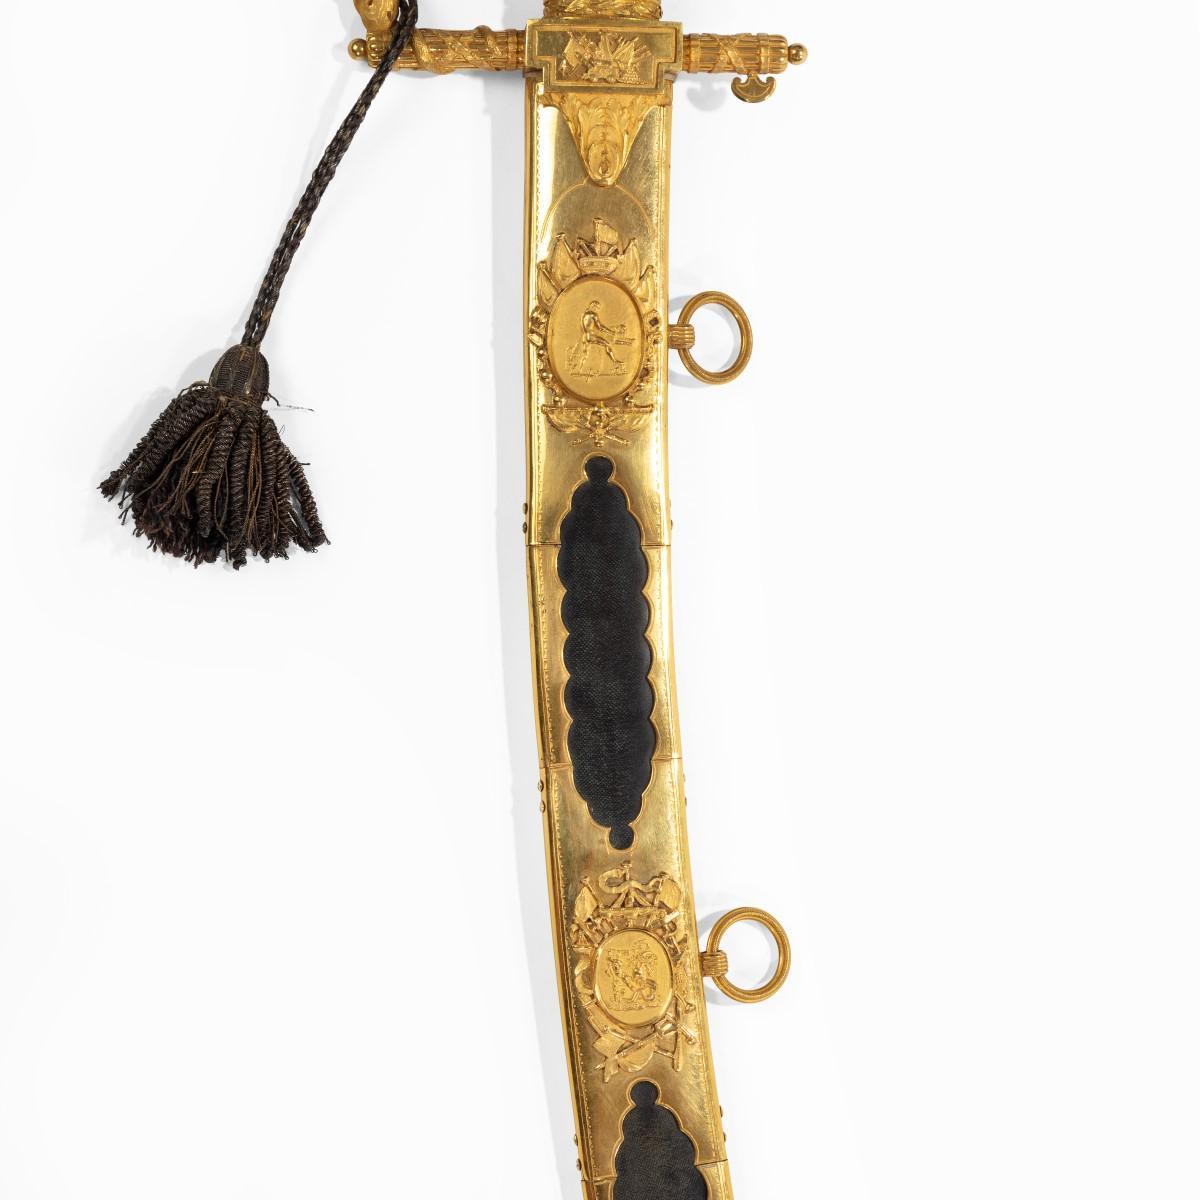 British Cased Lloyds £50 Sword for Valour Awarded to Lt. Ogle Moore of H.M.S. Maidston